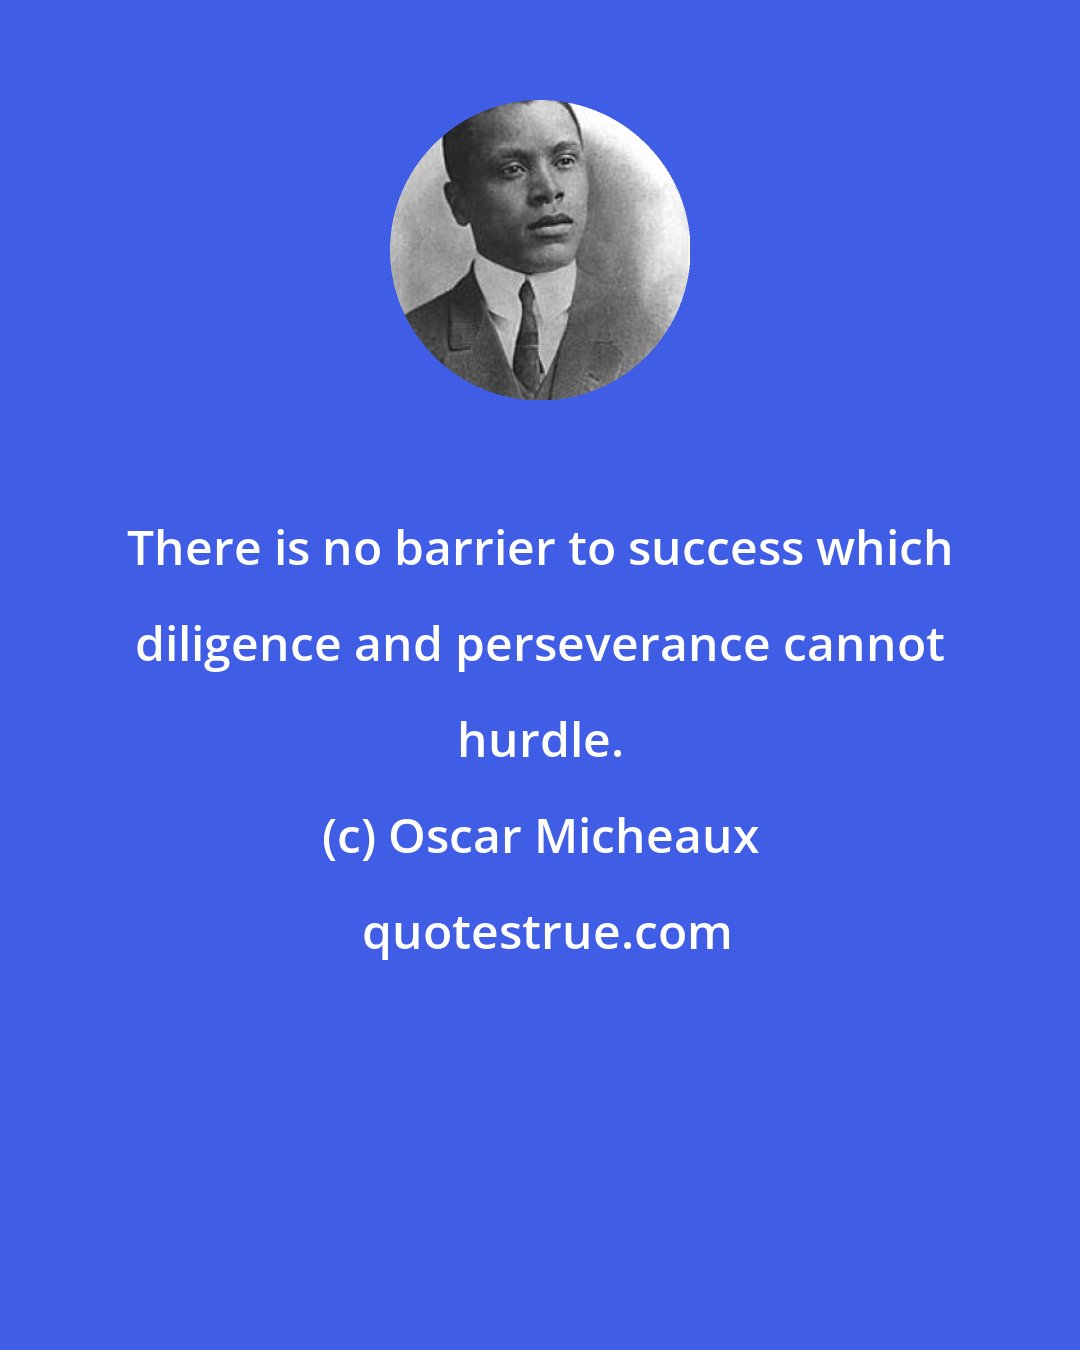 Oscar Micheaux: There is no barrier to success which diligence and perseverance cannot hurdle.